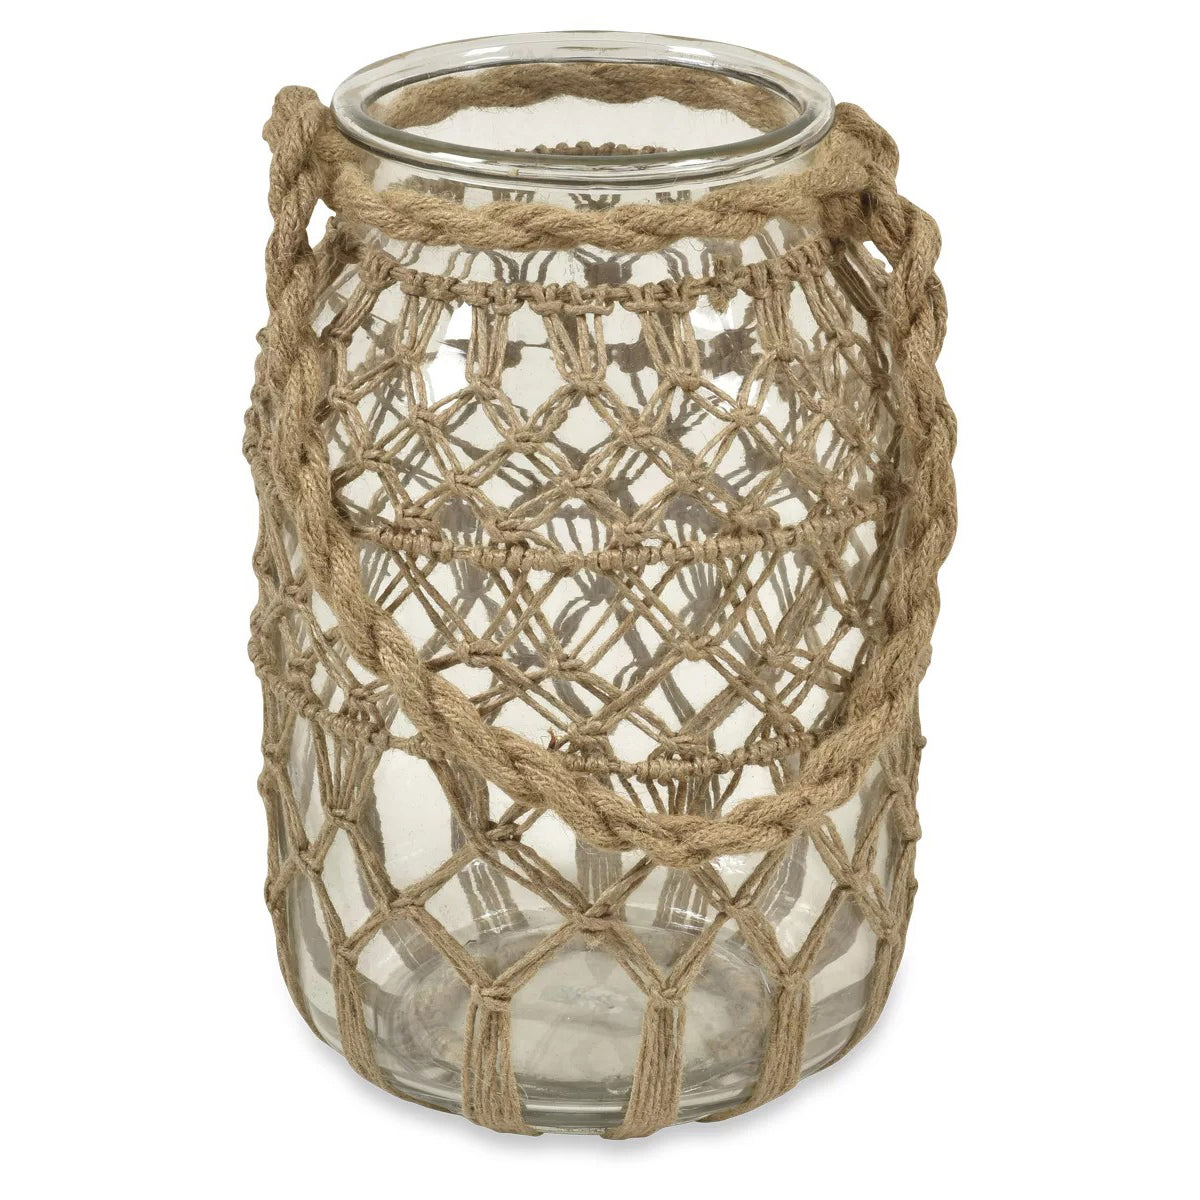 Roosa Glass And Jute Weave Jar With Handle - Medium